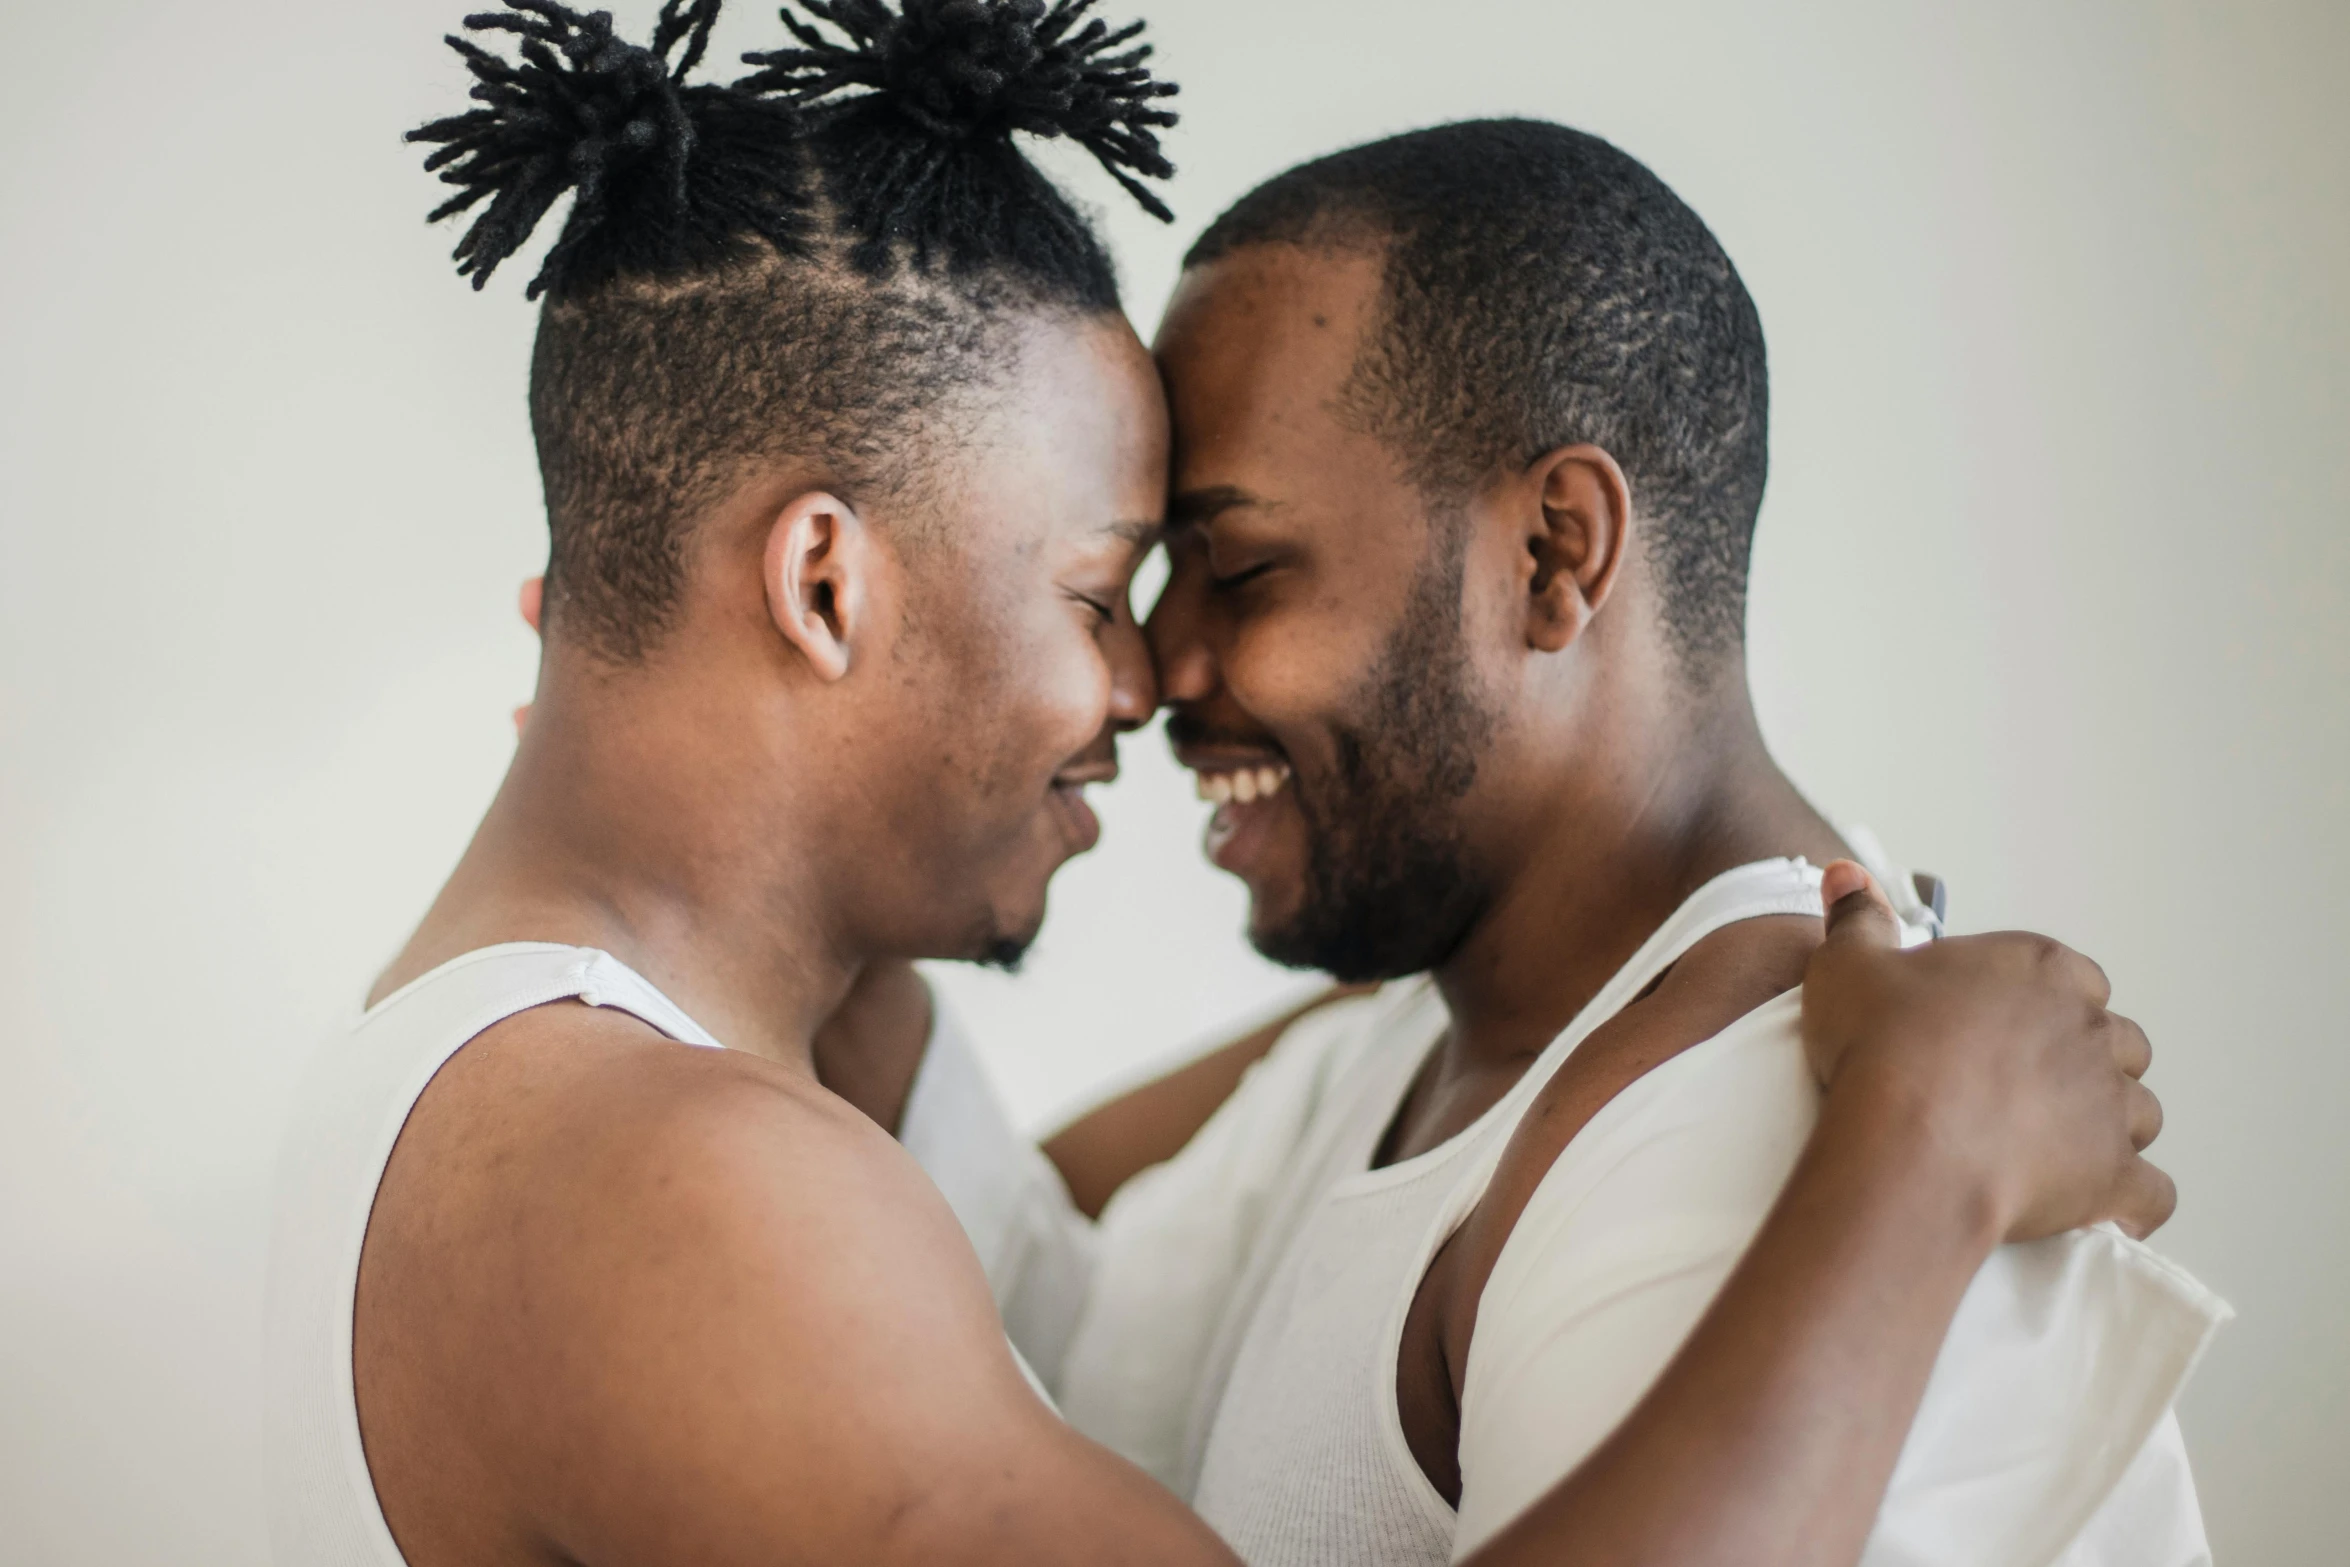 a black man with a mohawk gives a smiling woman a hug